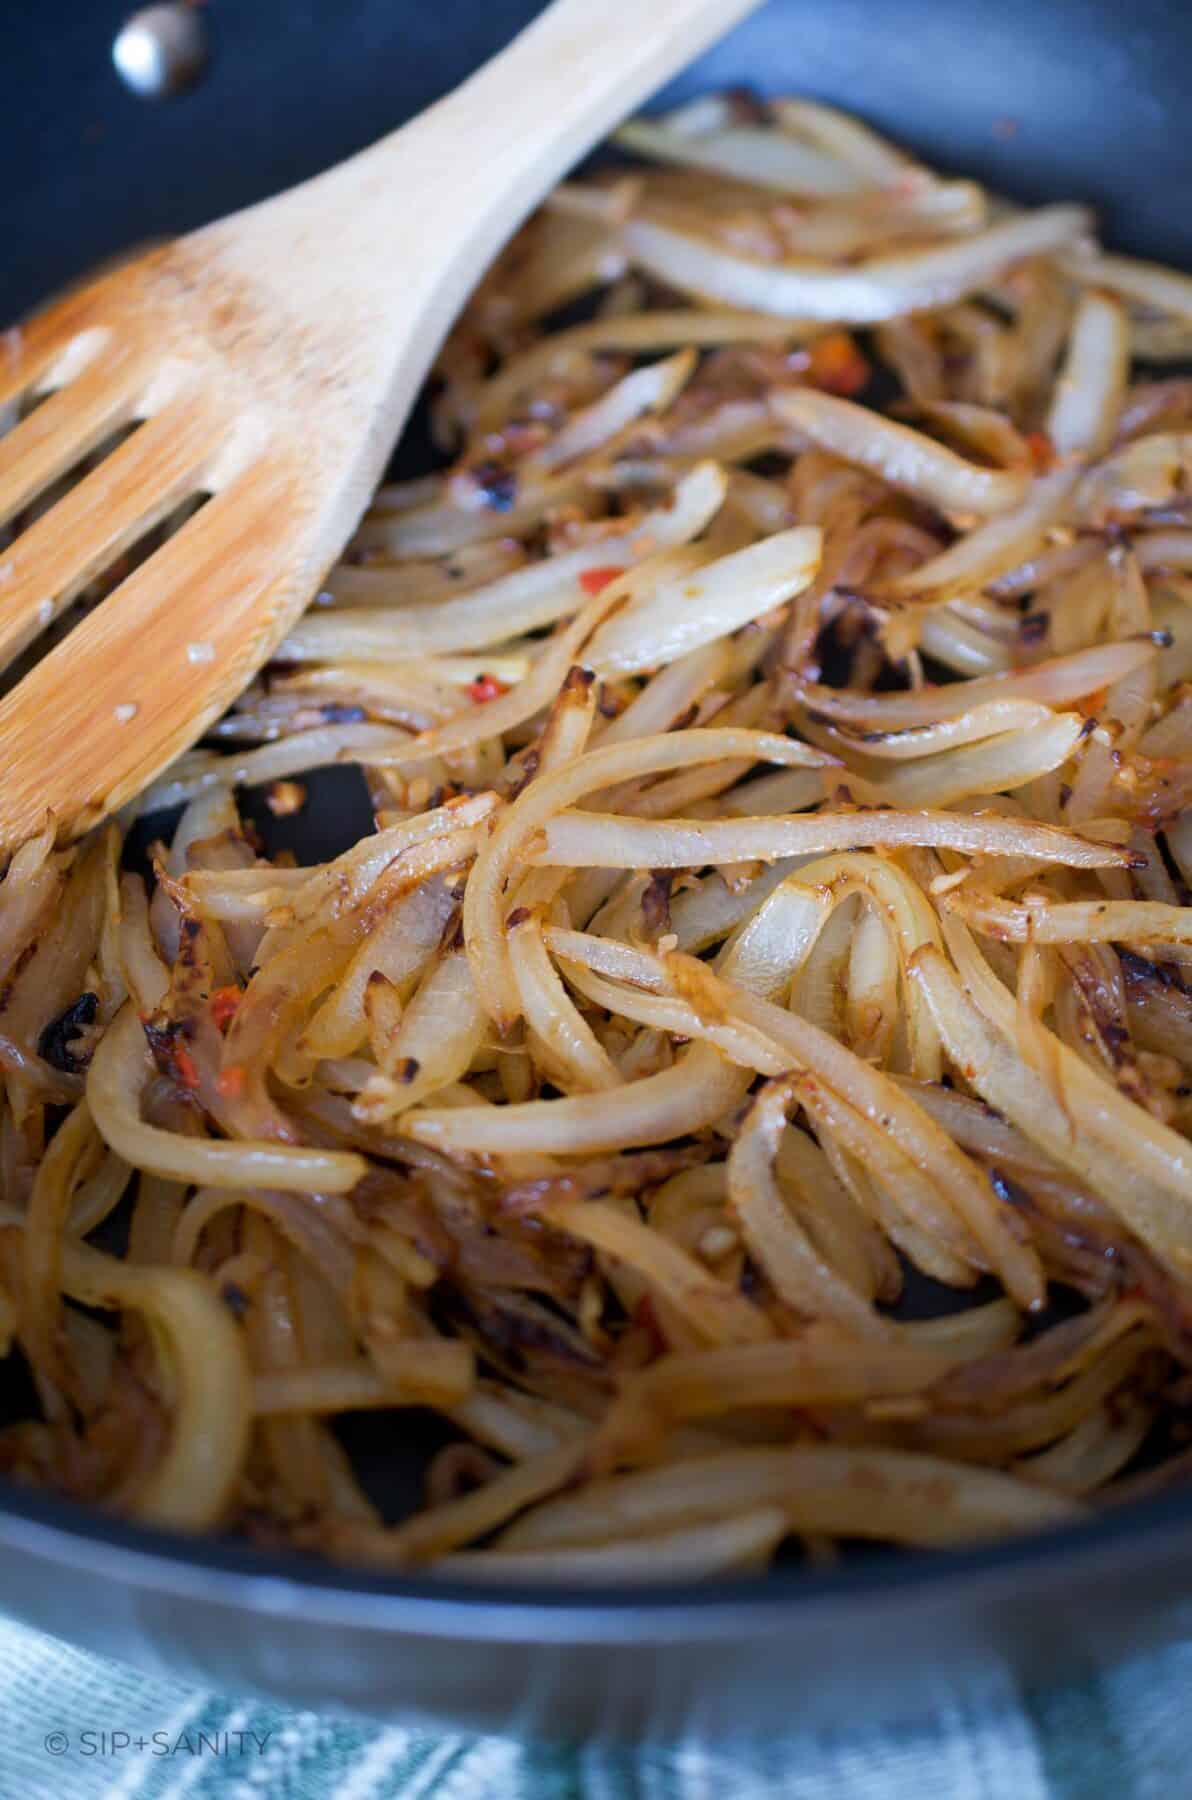 Caramelized strips of onion in a skillet with a wooden spoon resting on the edge.